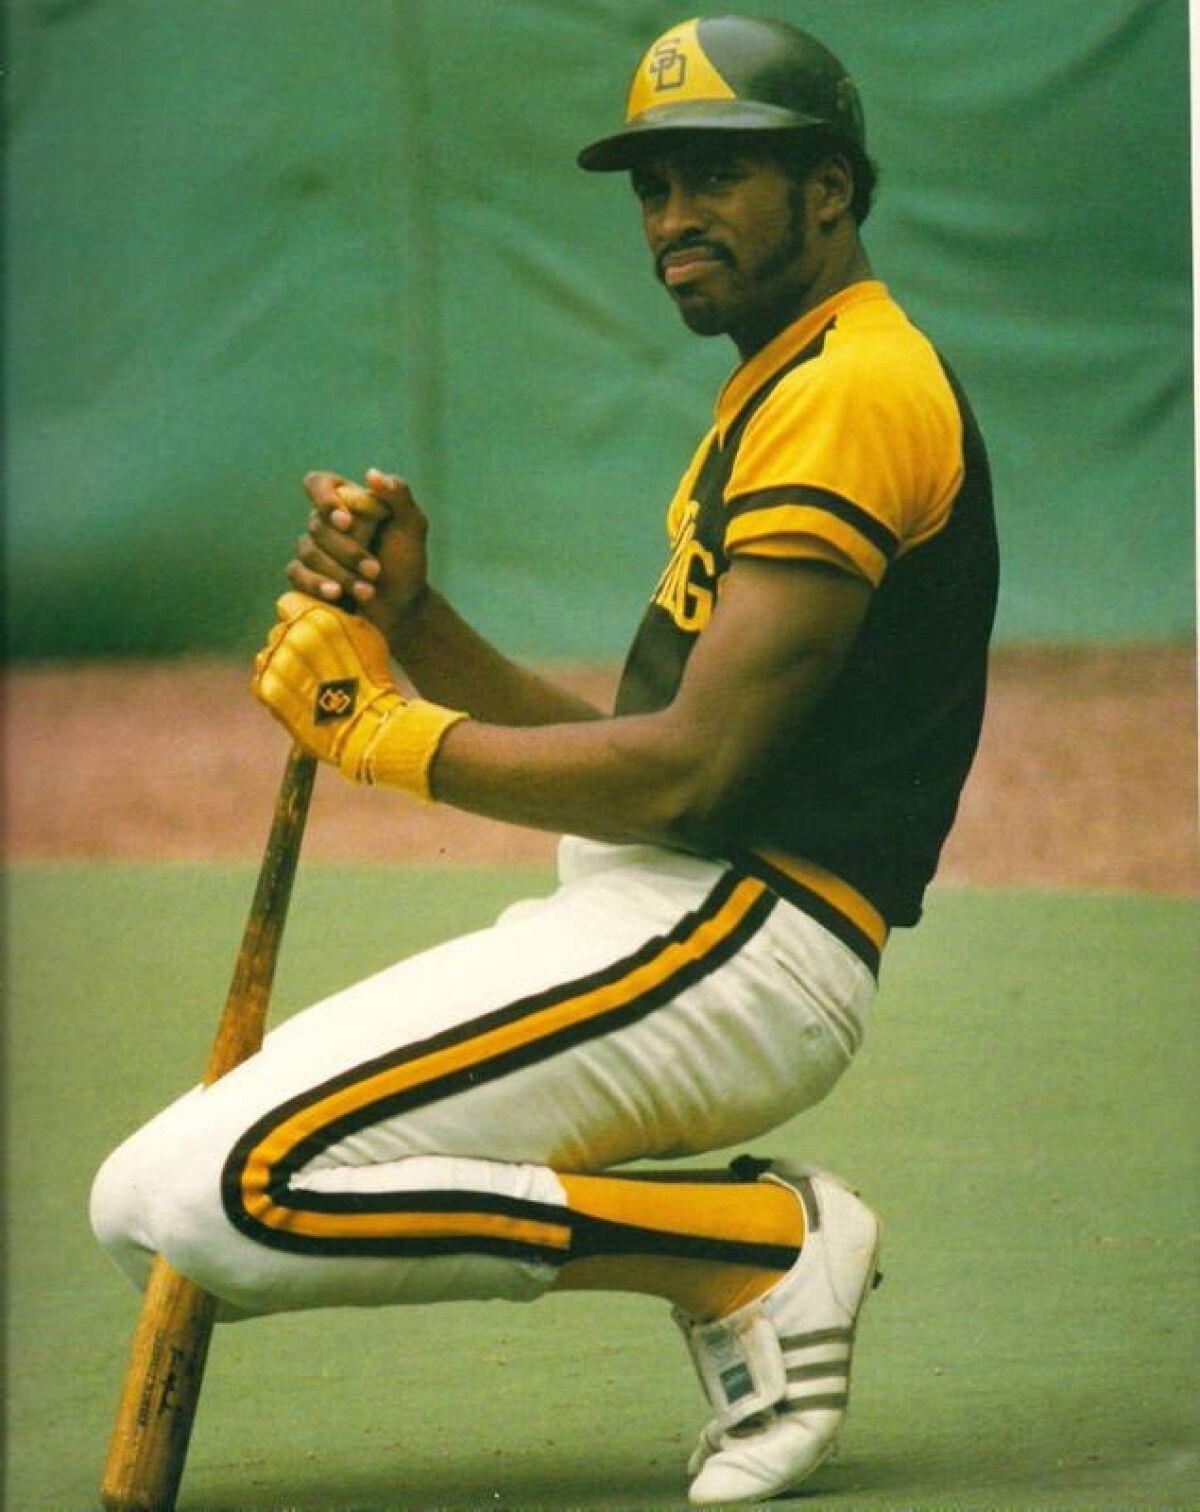 Dave Winfield in 1977